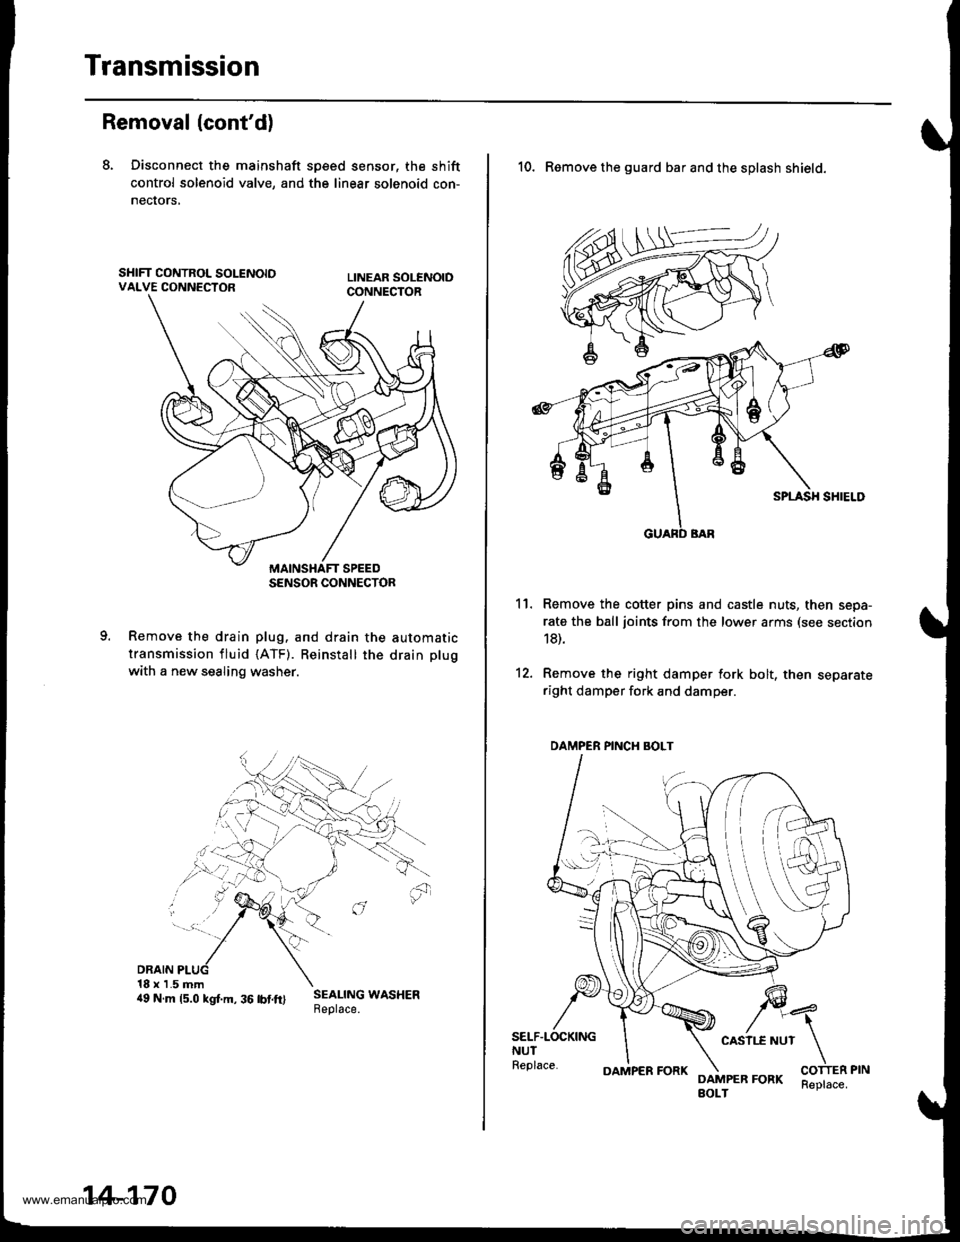 HONDA CR-V 1999 RD1-RD3 / 1.G Workshop Manual 
Transmission
Removal (contd)
8. Disconnect the mainshaft sp€ed sensor, the shift
control solenoid valve, and the linear solenoid con-
necrors,
Remove the drain plug. and drain the automatic
transm